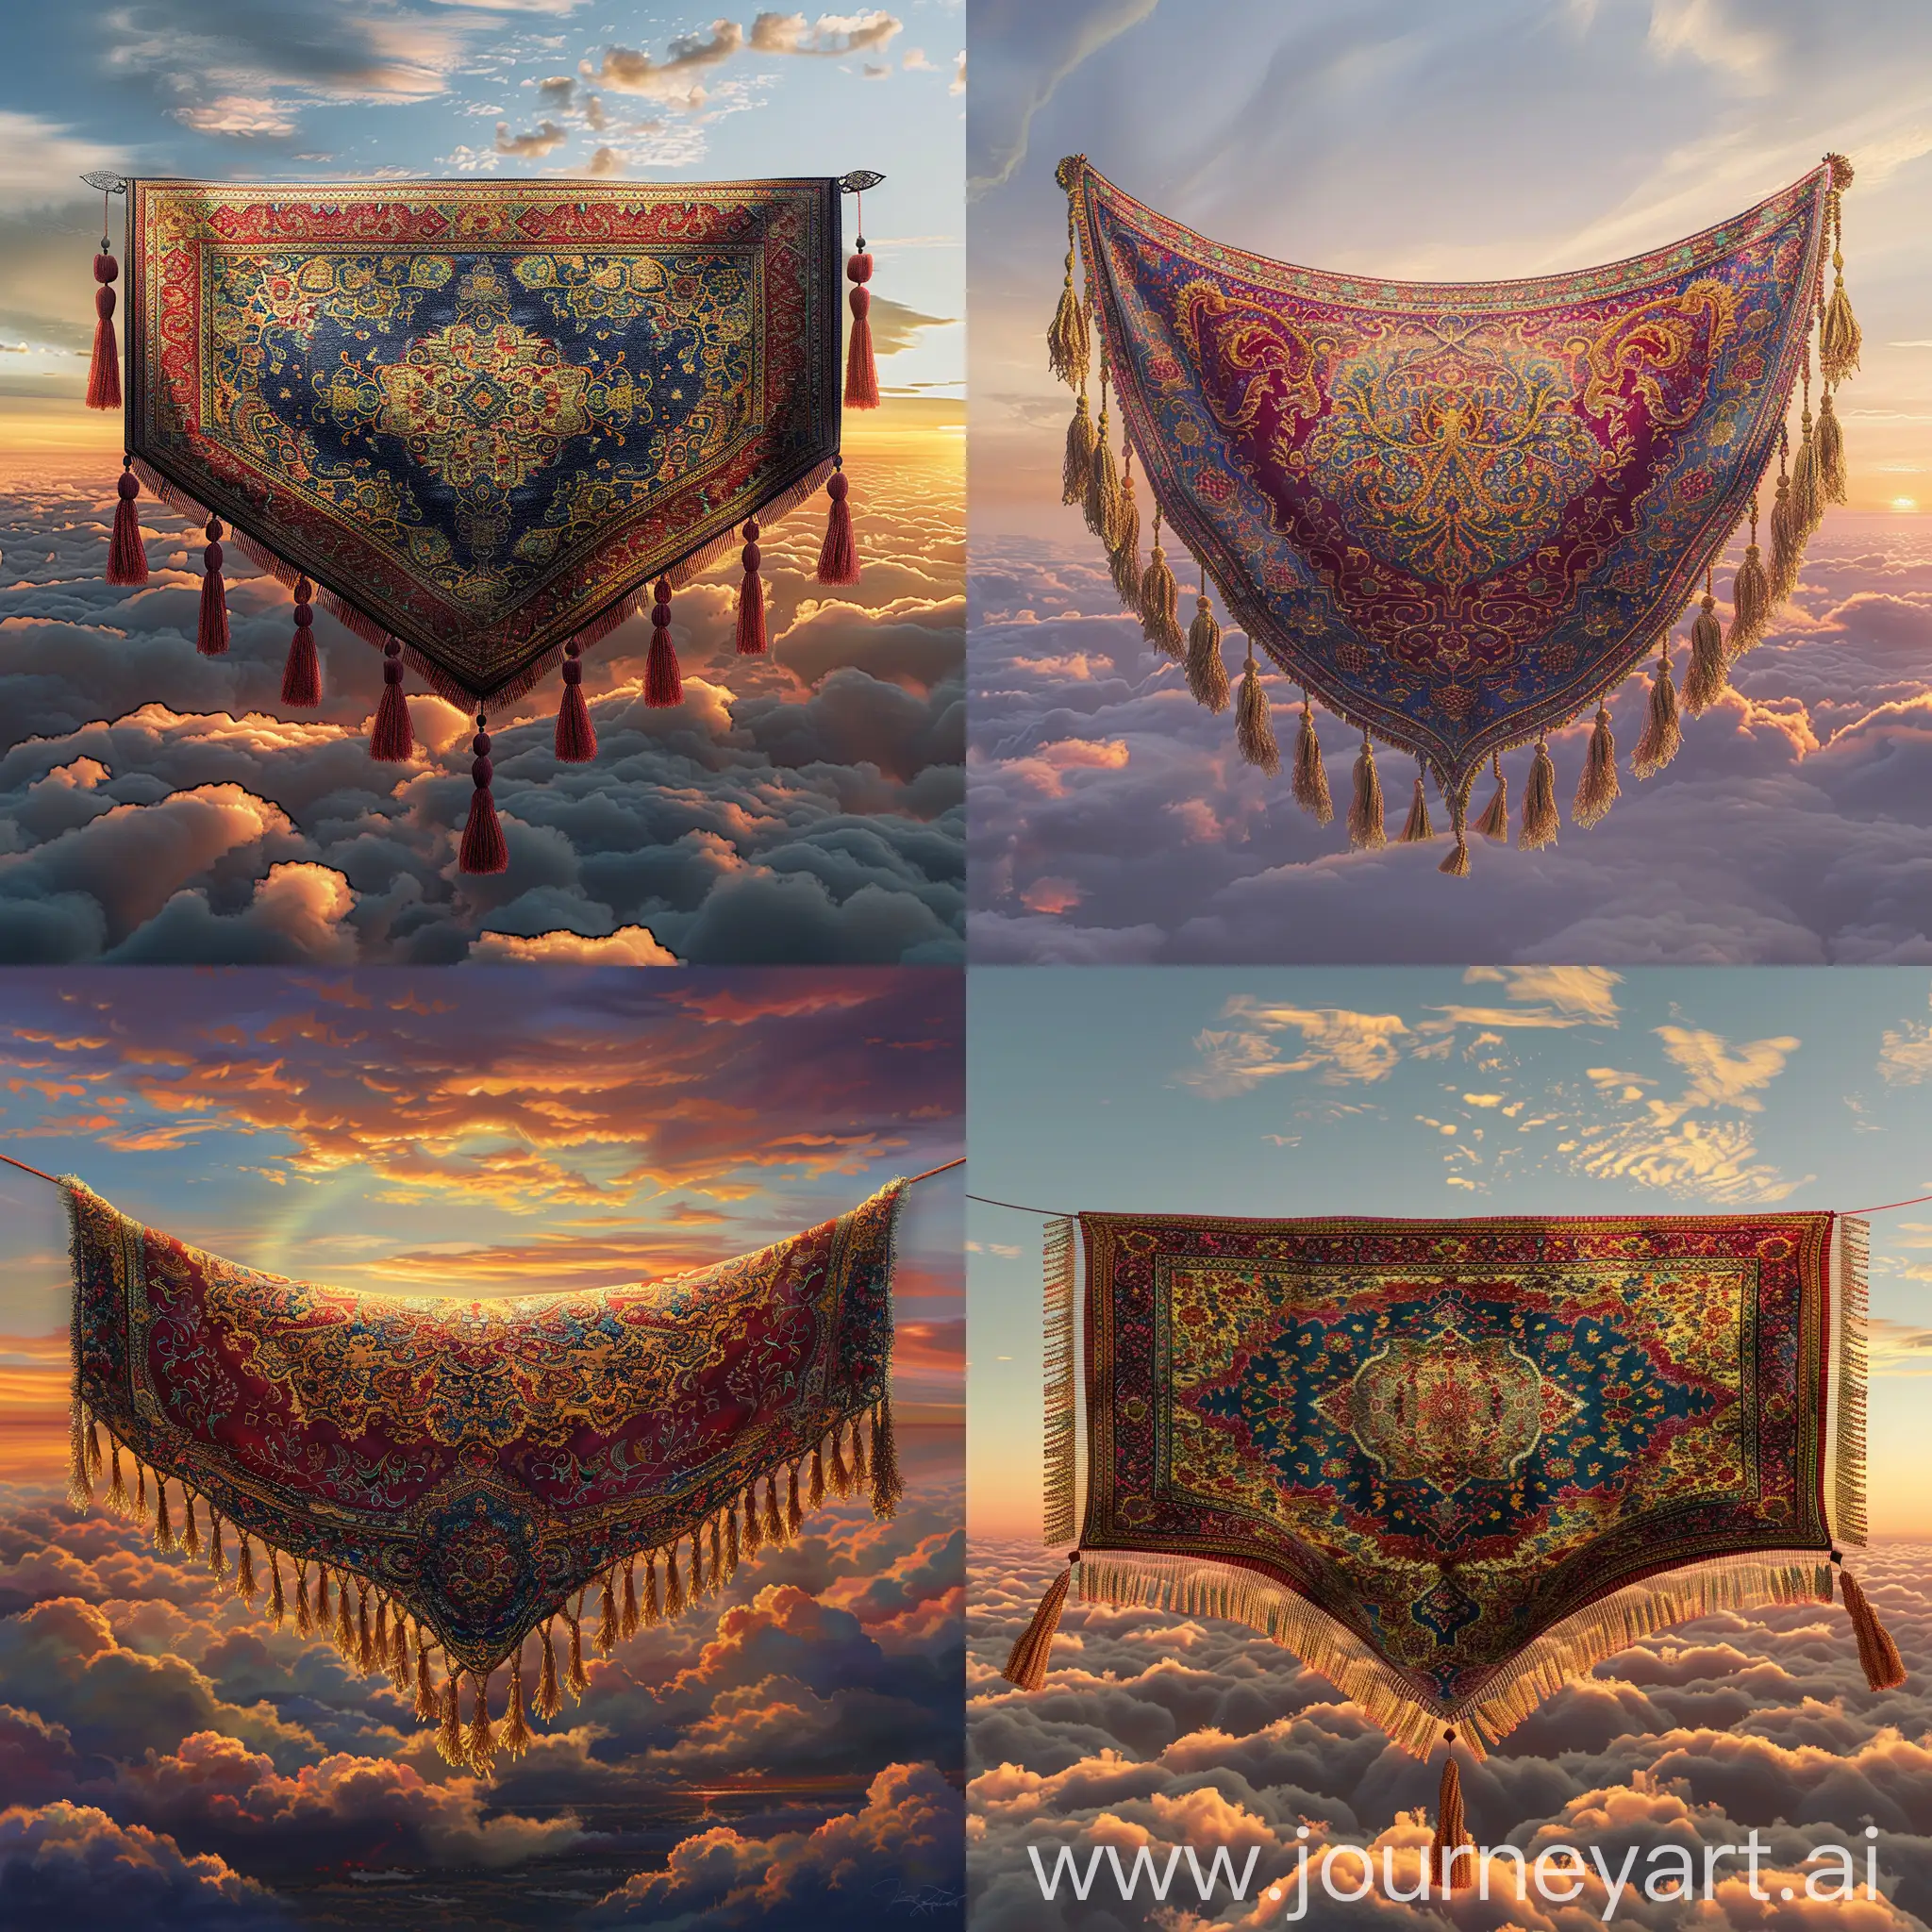 In a mystical setting, a vibrant flying carpet soars through the sky. The carpet is intricately woven with rich, ornate patterns in deep reds, golds, and blues, creating an exotic and enchanting appearance. The tassels on its edges flutter in the wind as it glides effortlessly above the clouds, offering a breathtaking view of the world below. The sky is a mesmerizing gradient of twilight hues, with the sun setting in the distance, casting a warm, golden glow over the scene. The sense of magic and adventure is palpable, as the carpet seems to promise endless journeys and wondrous discoveries.